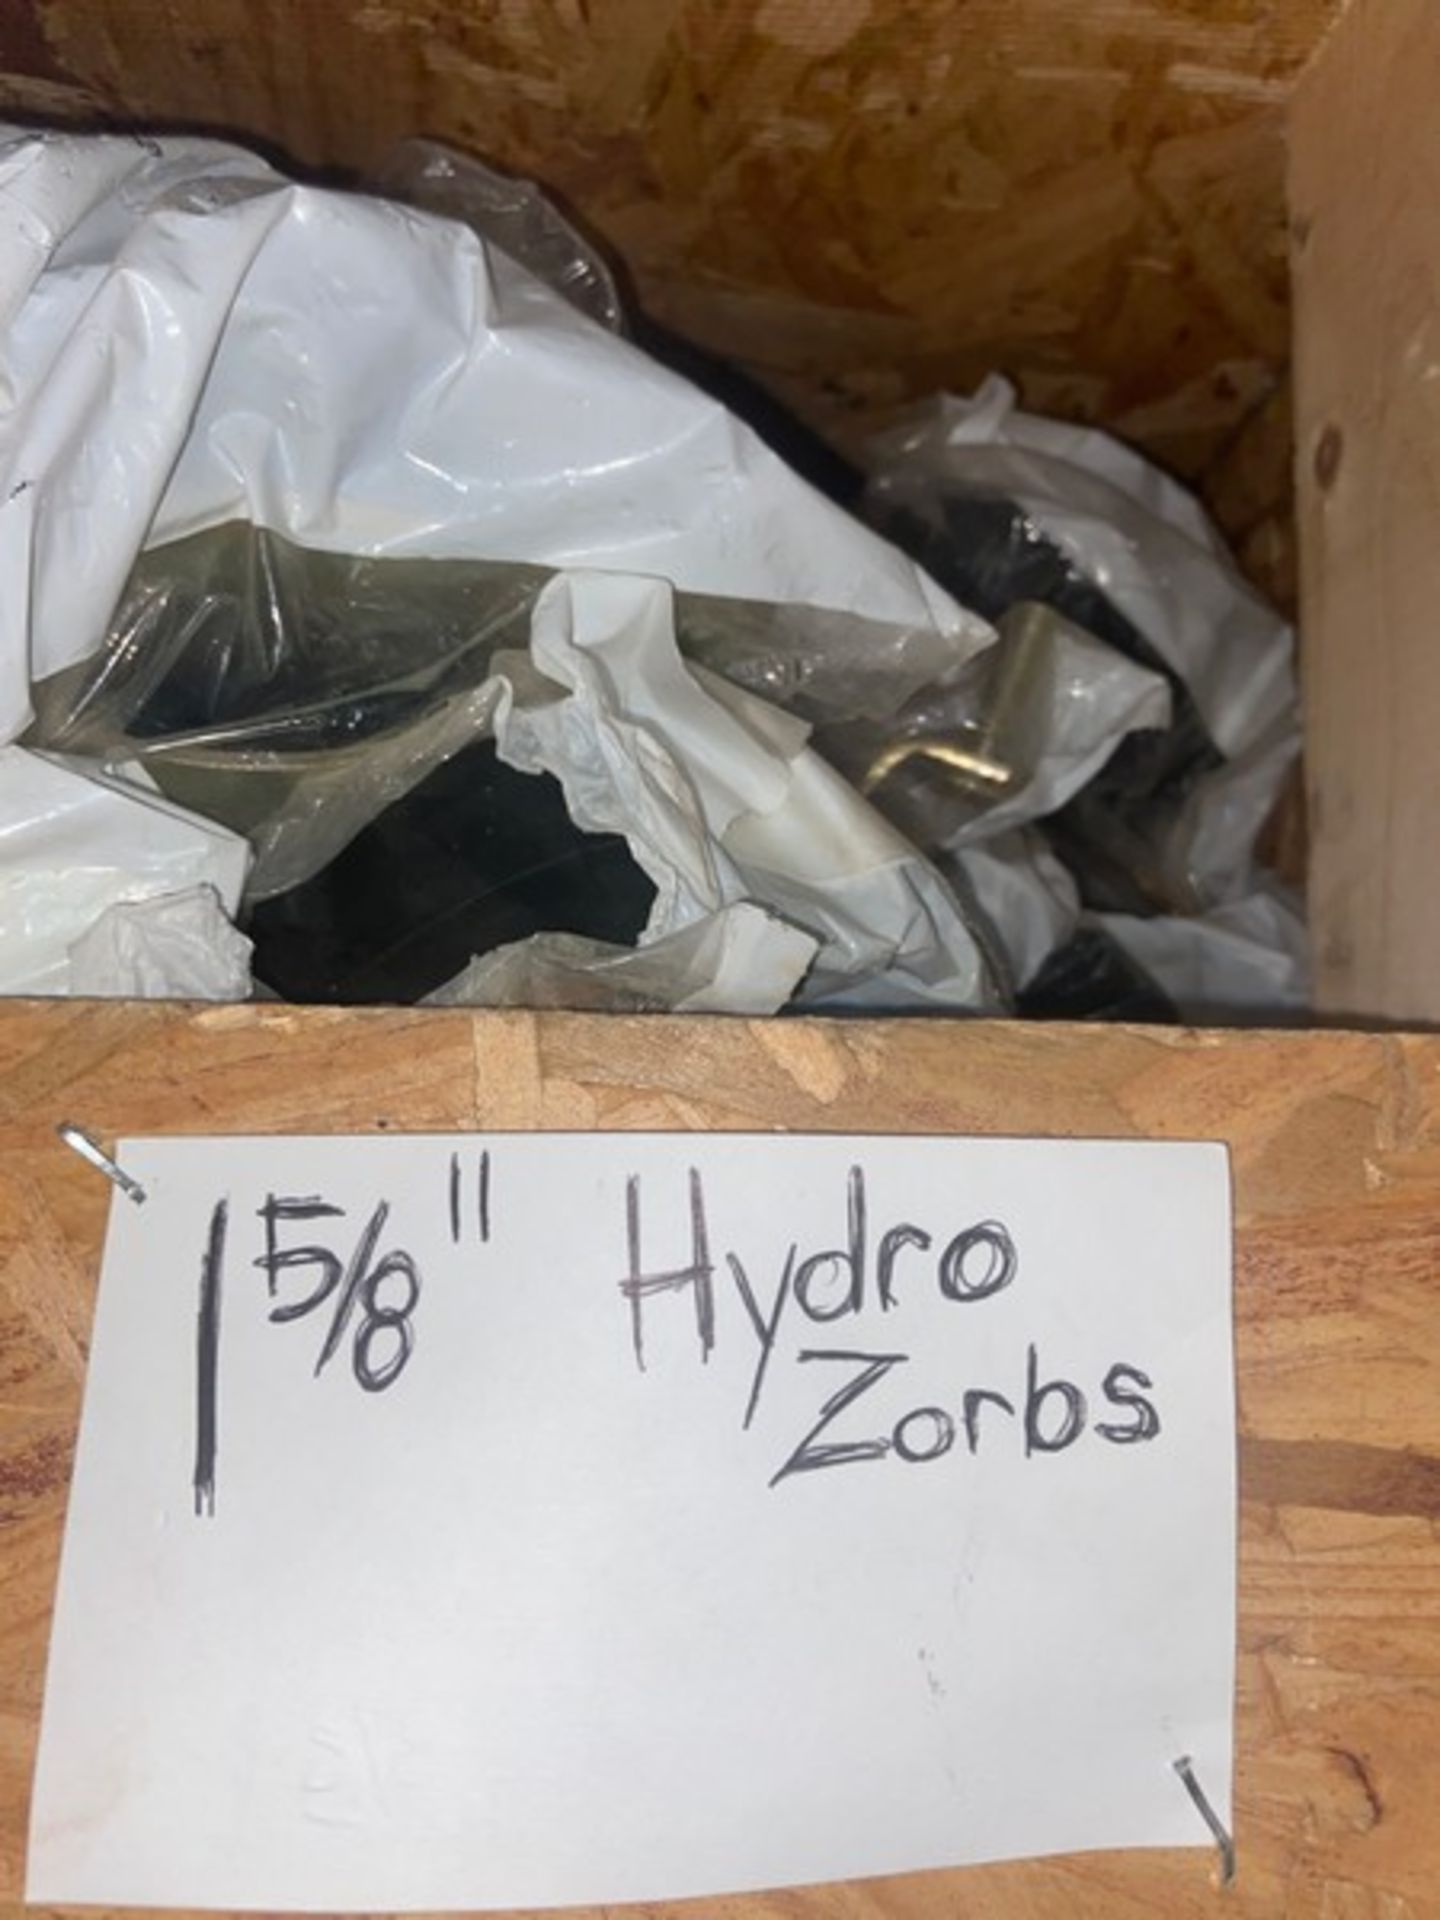 Contents of (8) Cubby’s, Includes Assortment of 5/8” Hydro Zorbs, 7/8” Hydra-Zorbs, 1-5/8” Hydro- - Bild 6 aus 9